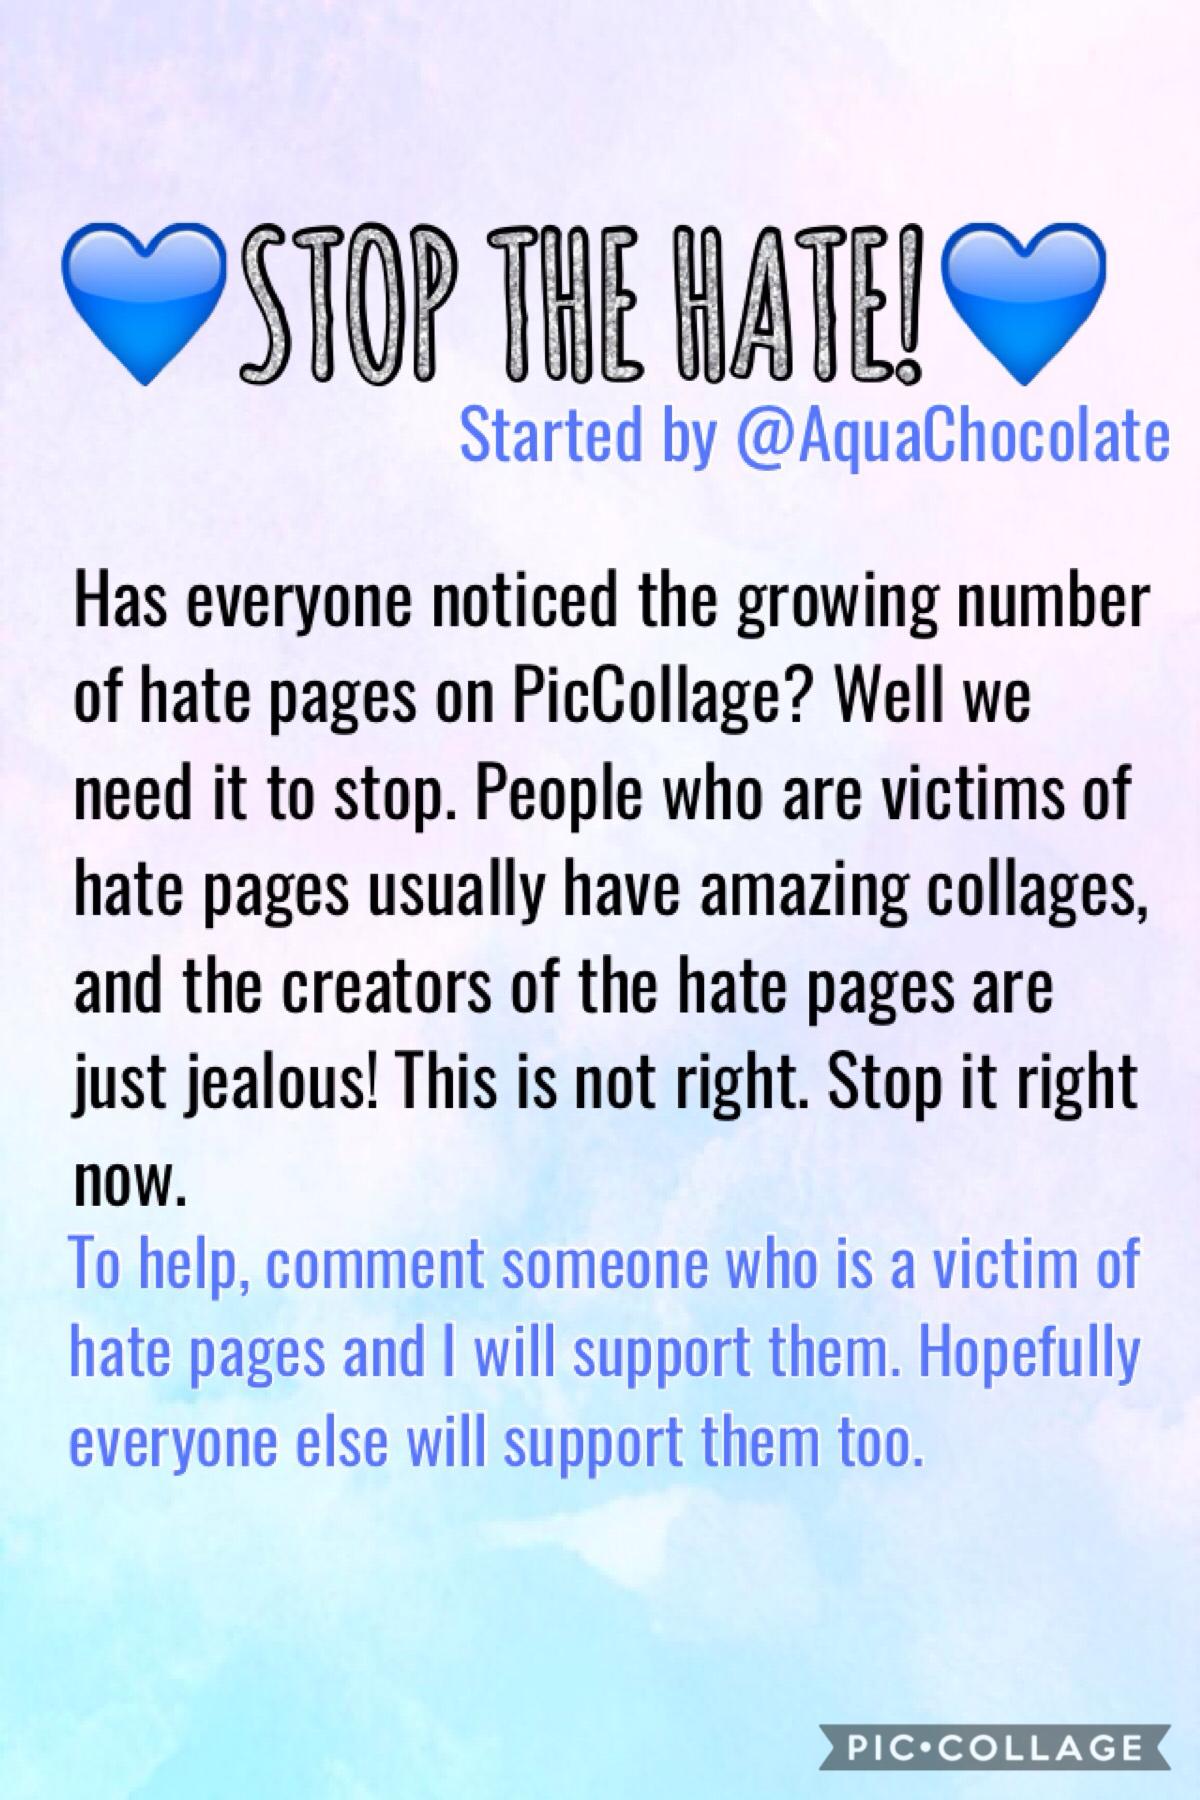 #Stopthehate TAP
Plz repost, comment and spread the word to eceryone